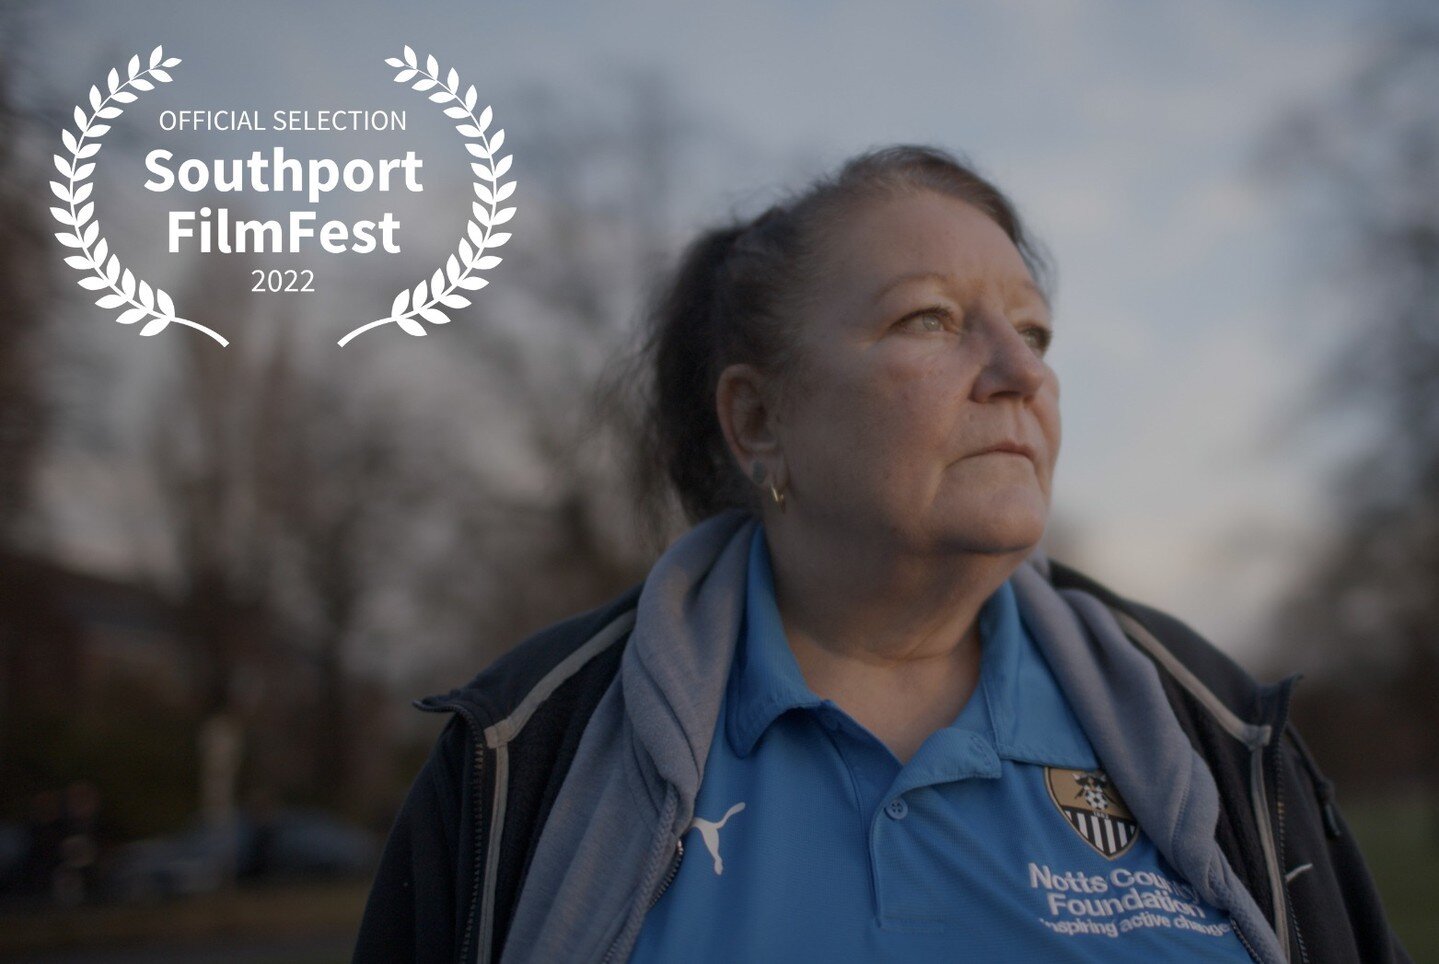 We are very excited to announce that our film CENTRED has been chosen as part of the official selection for Southport FilmFest! @sissfestival